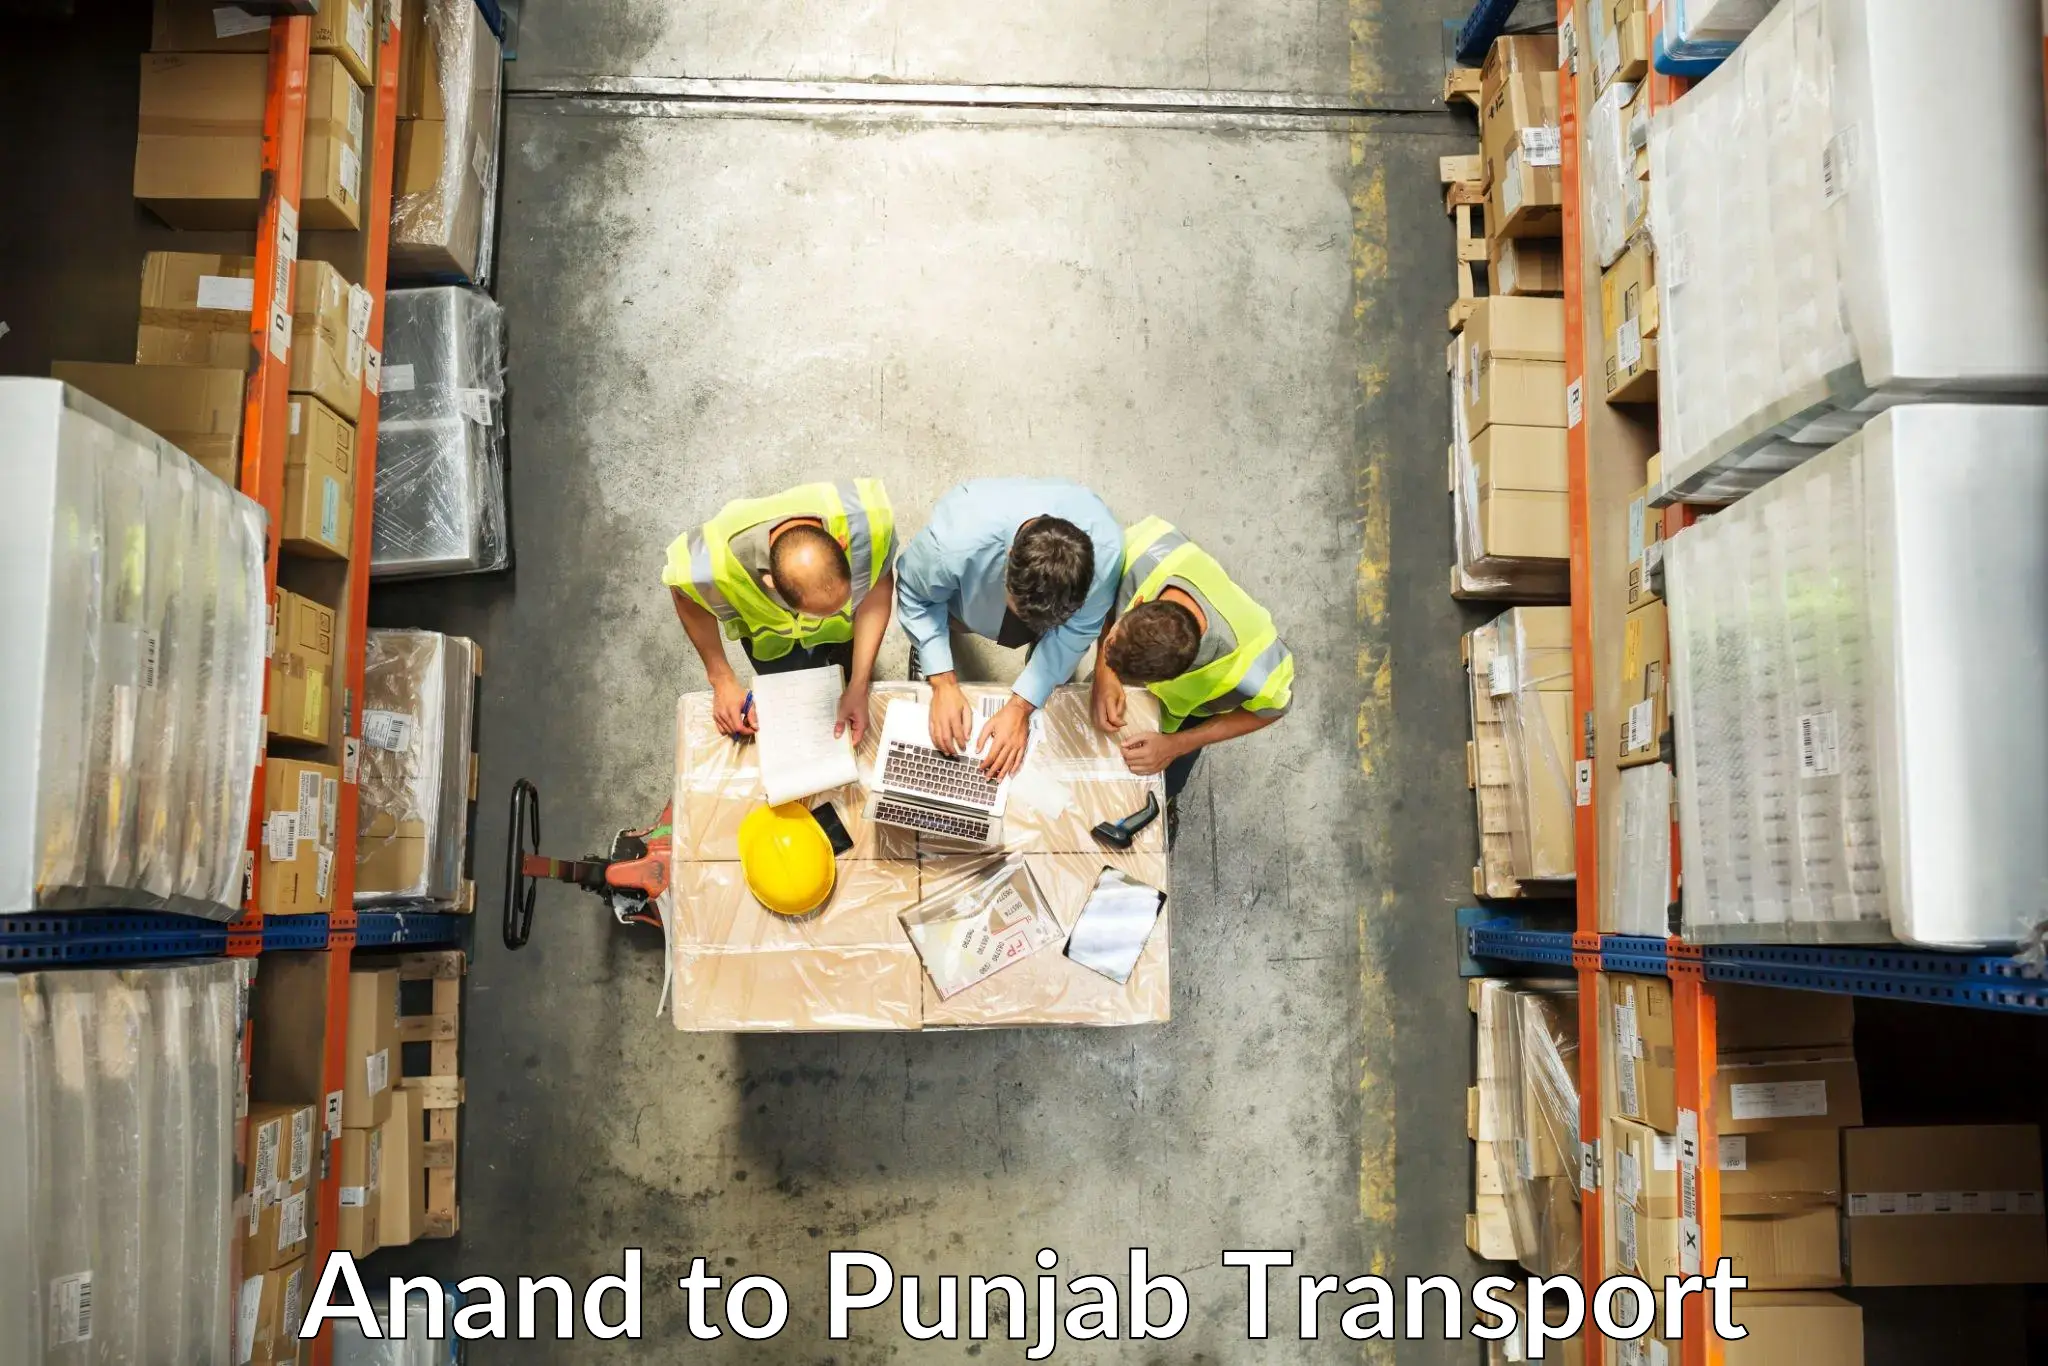 Daily transport service Anand to Punjab